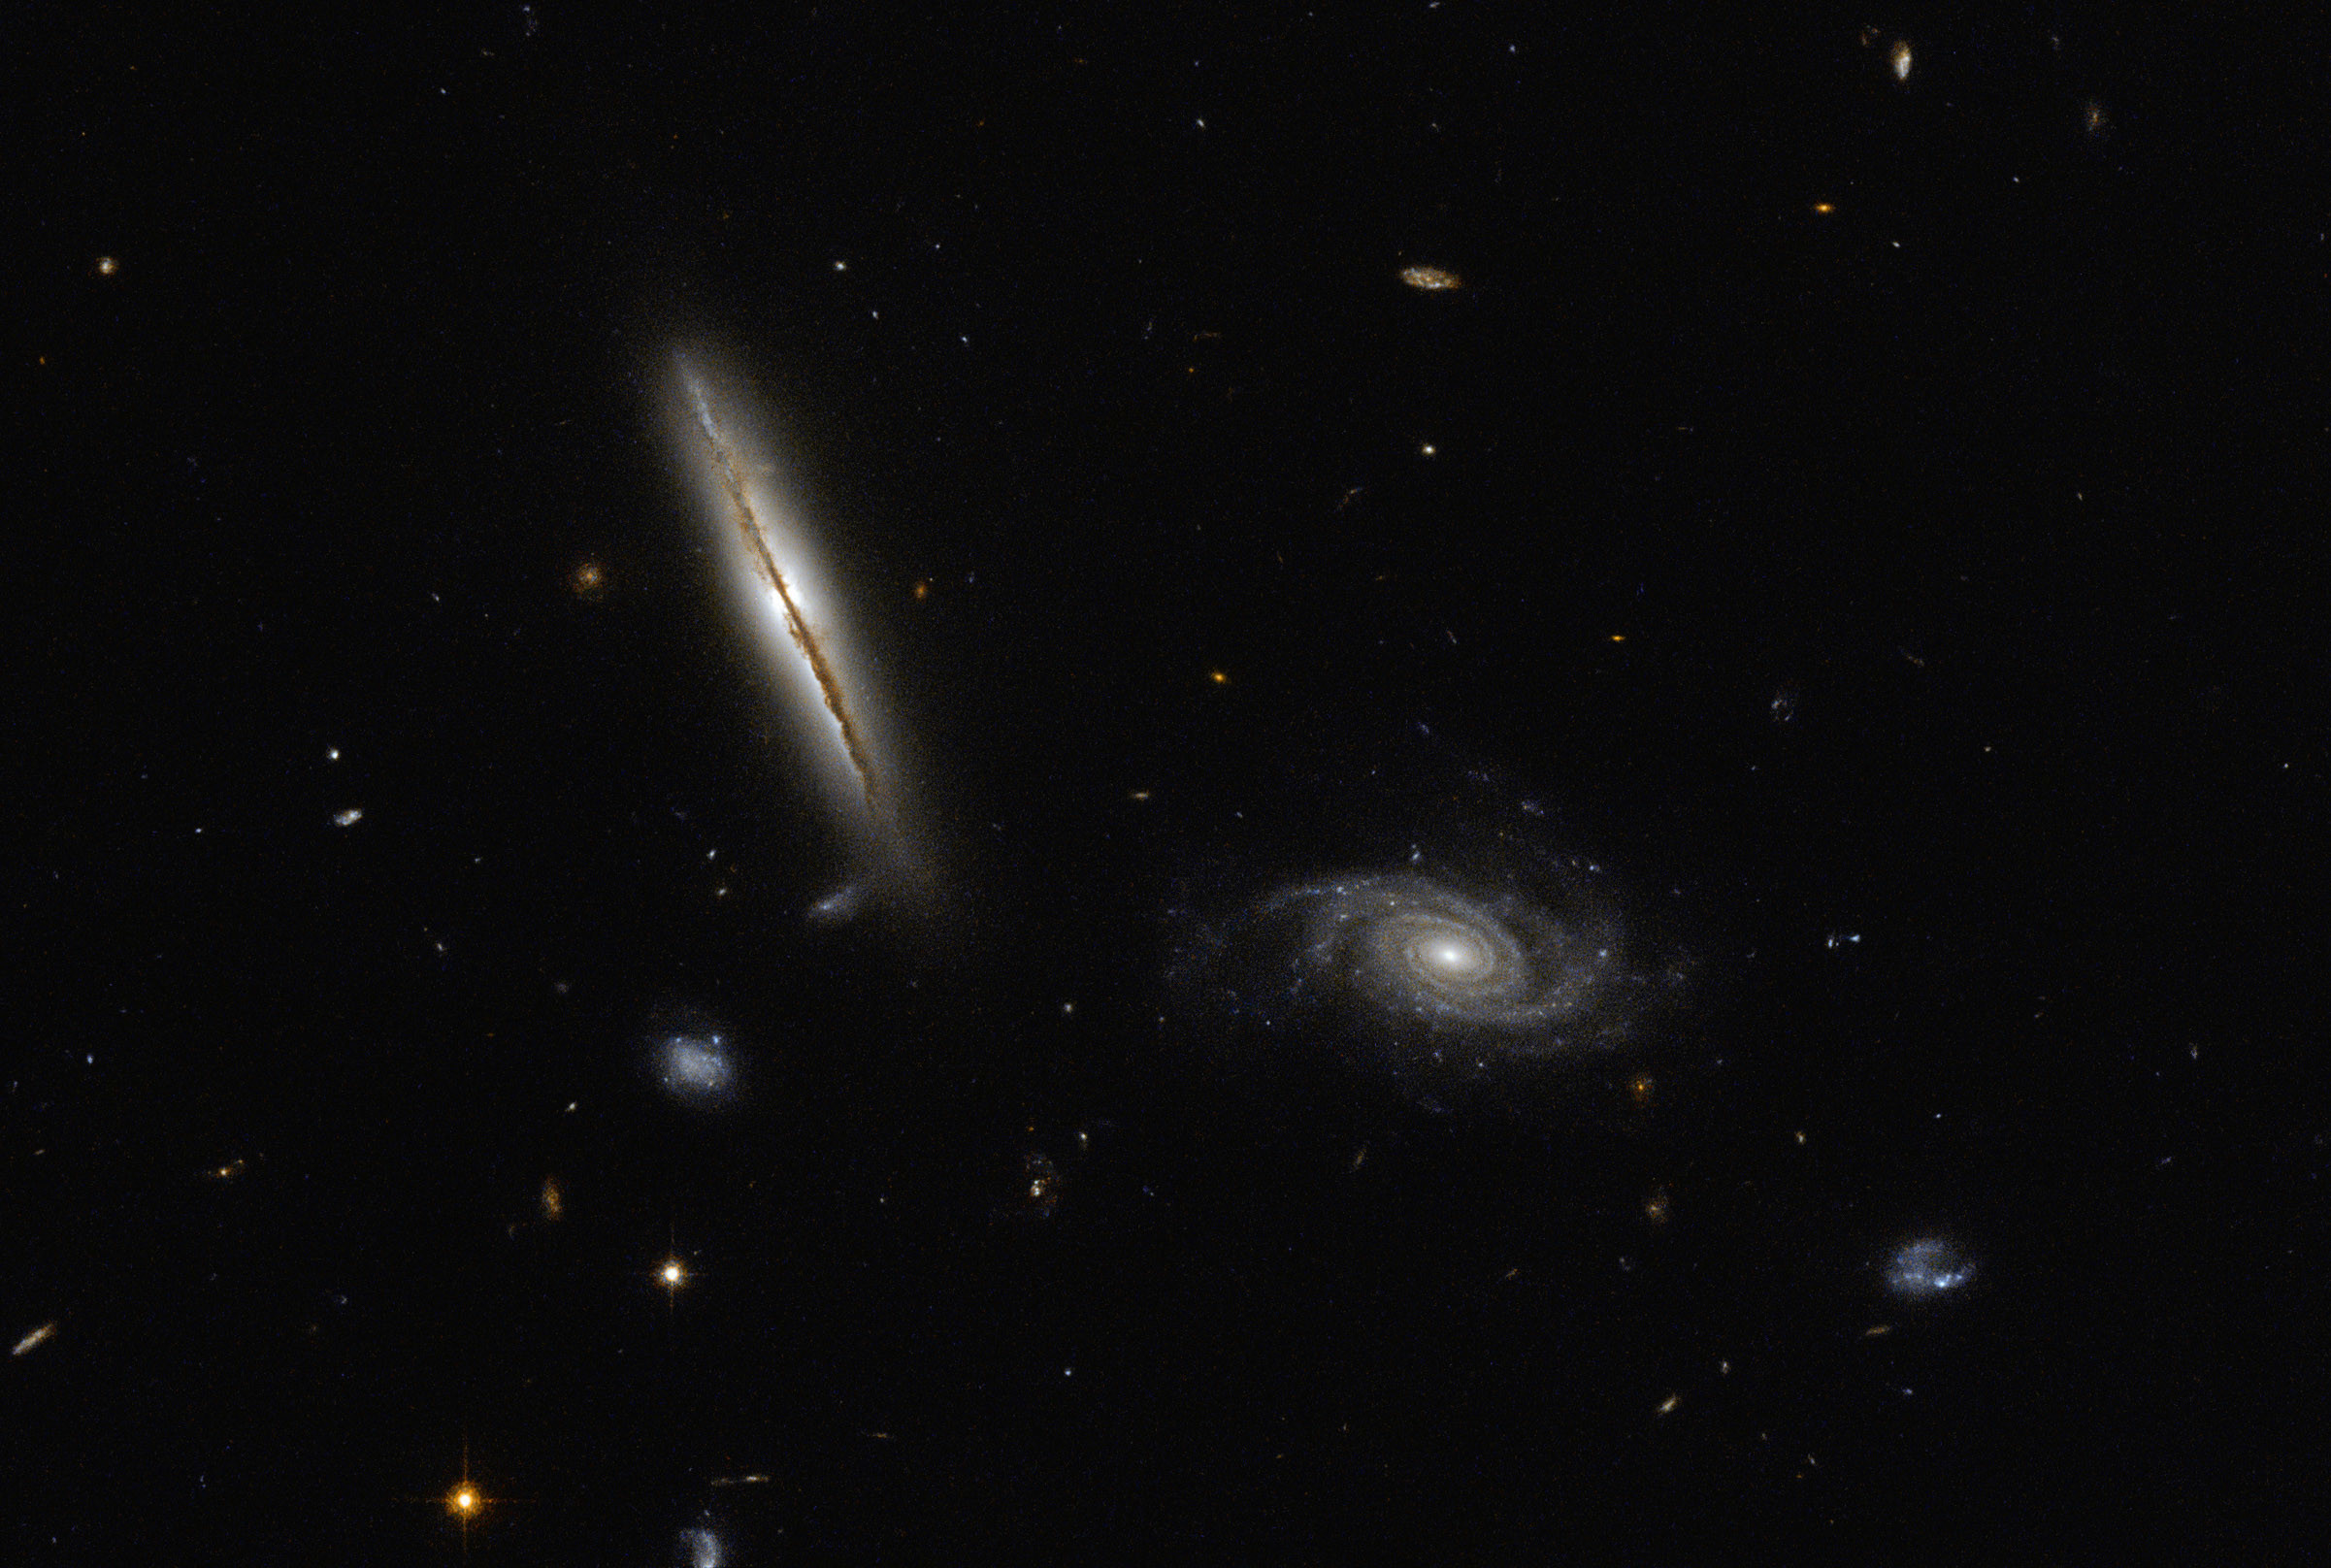 2402x1616 Hubble Space Telescope image of spiral galaxies LO95 0313-192 (left) and [